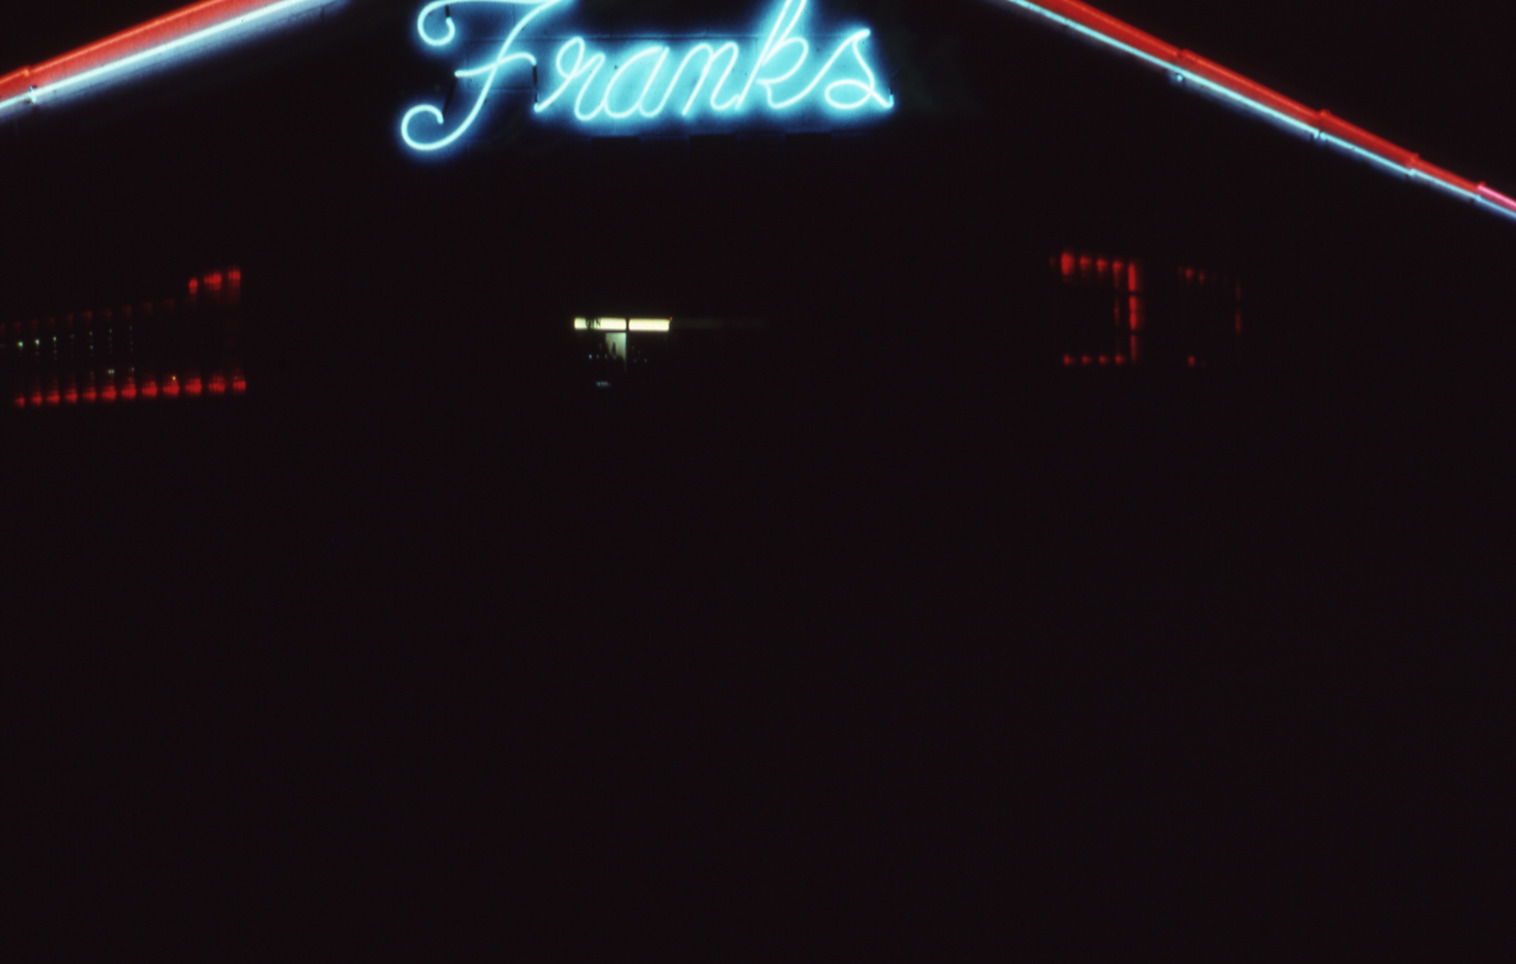 Hot Dog stand lettering sign, Las Vegas, Nevada: photographic print